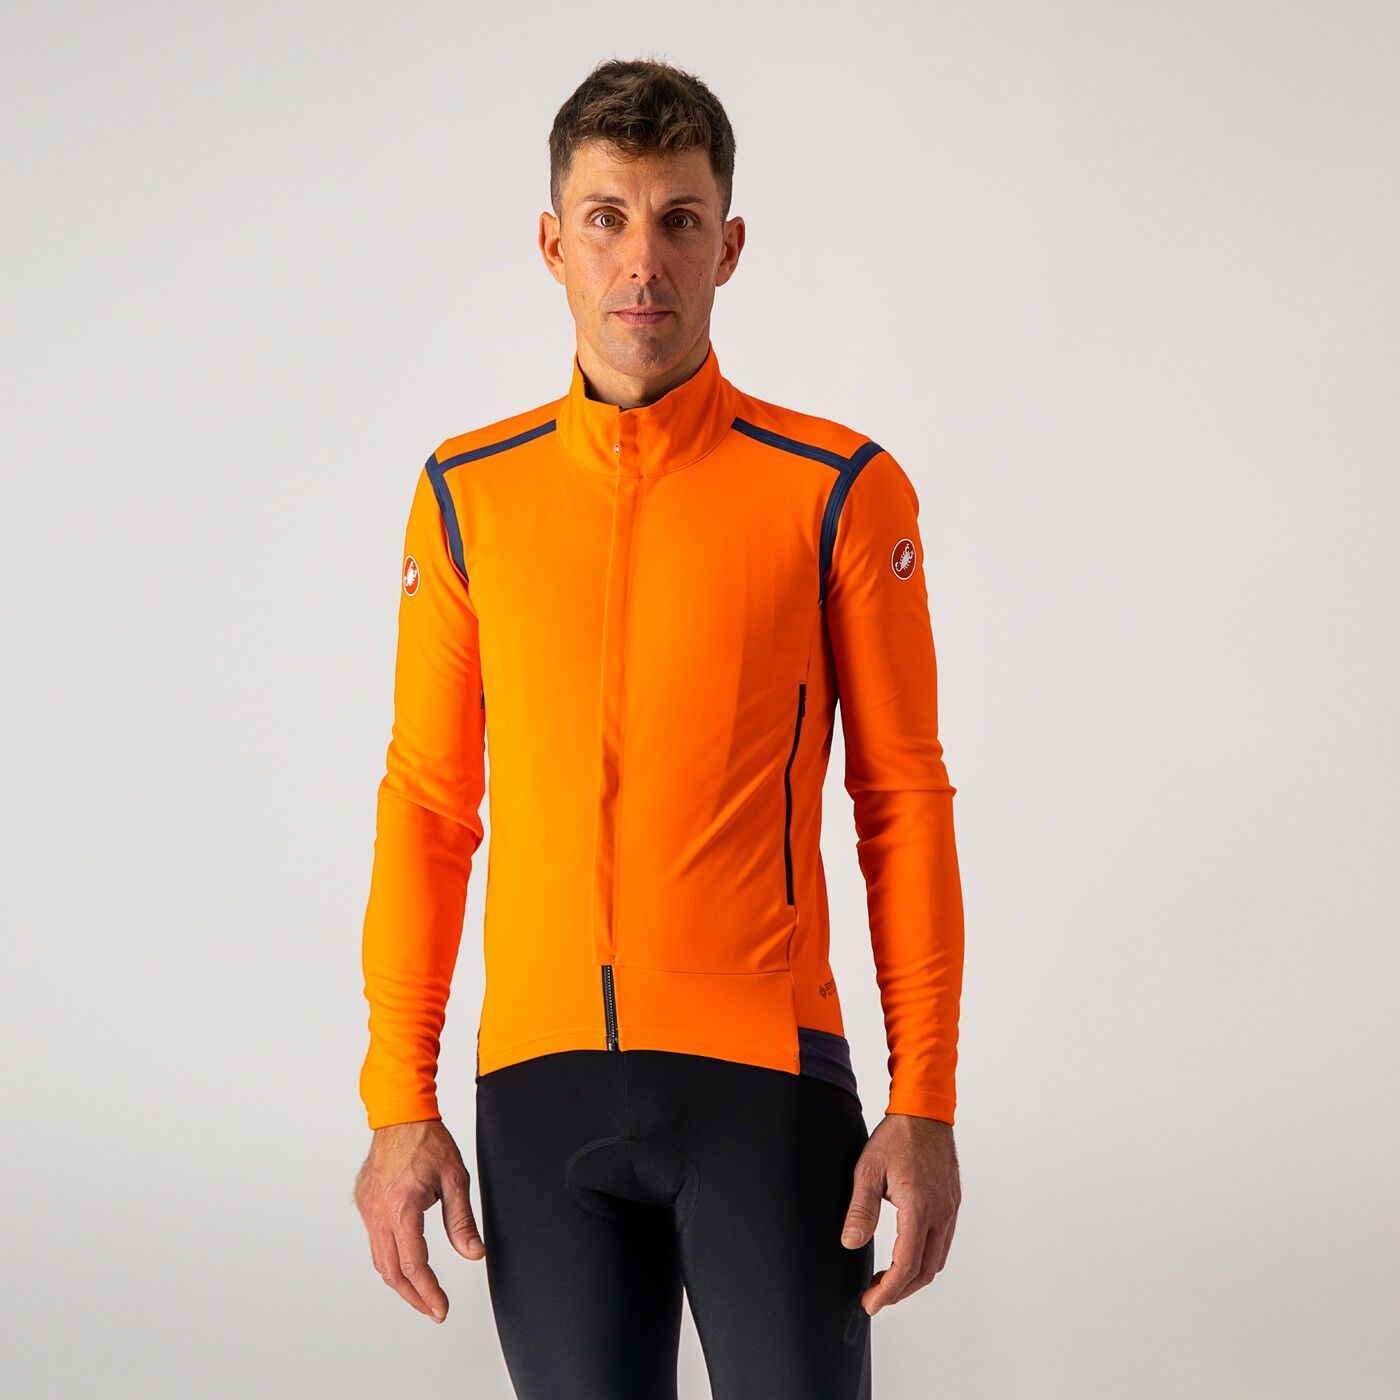 Castelli Perfetto RoS Long Sleeve - Cycling windproof jacket - Men's